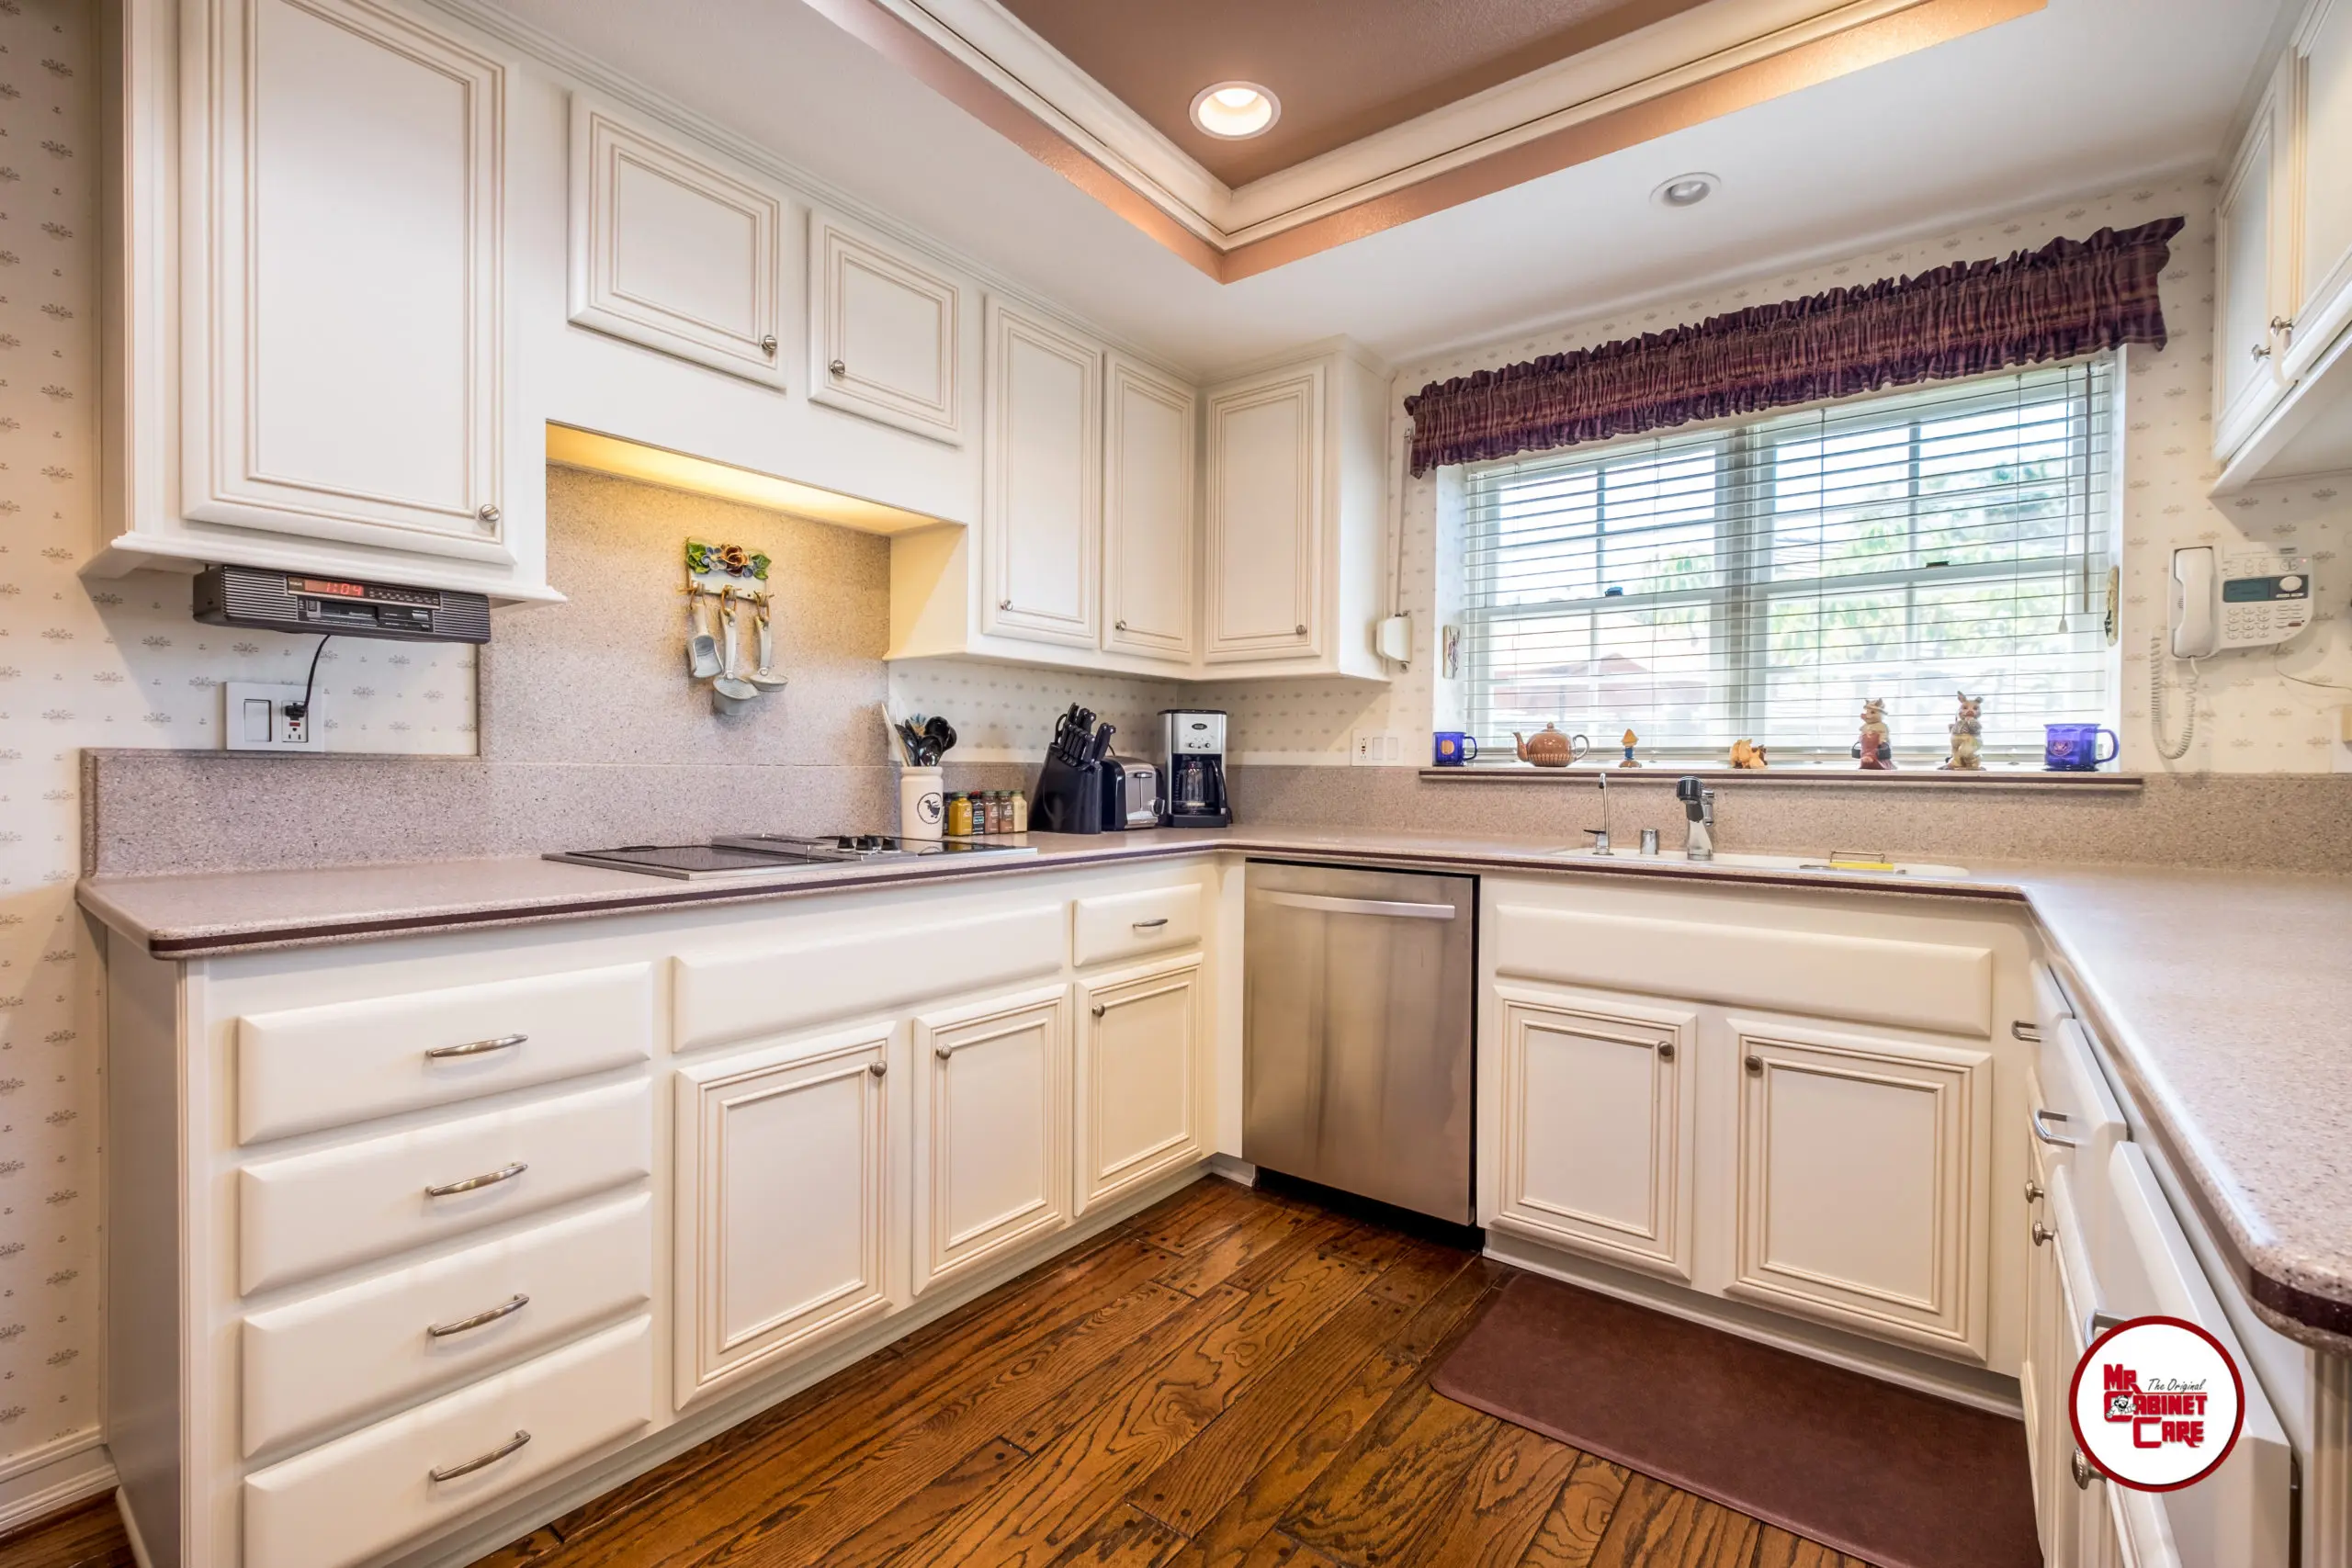 How Much Does It Cost to Reface Kitchen Cabinets?